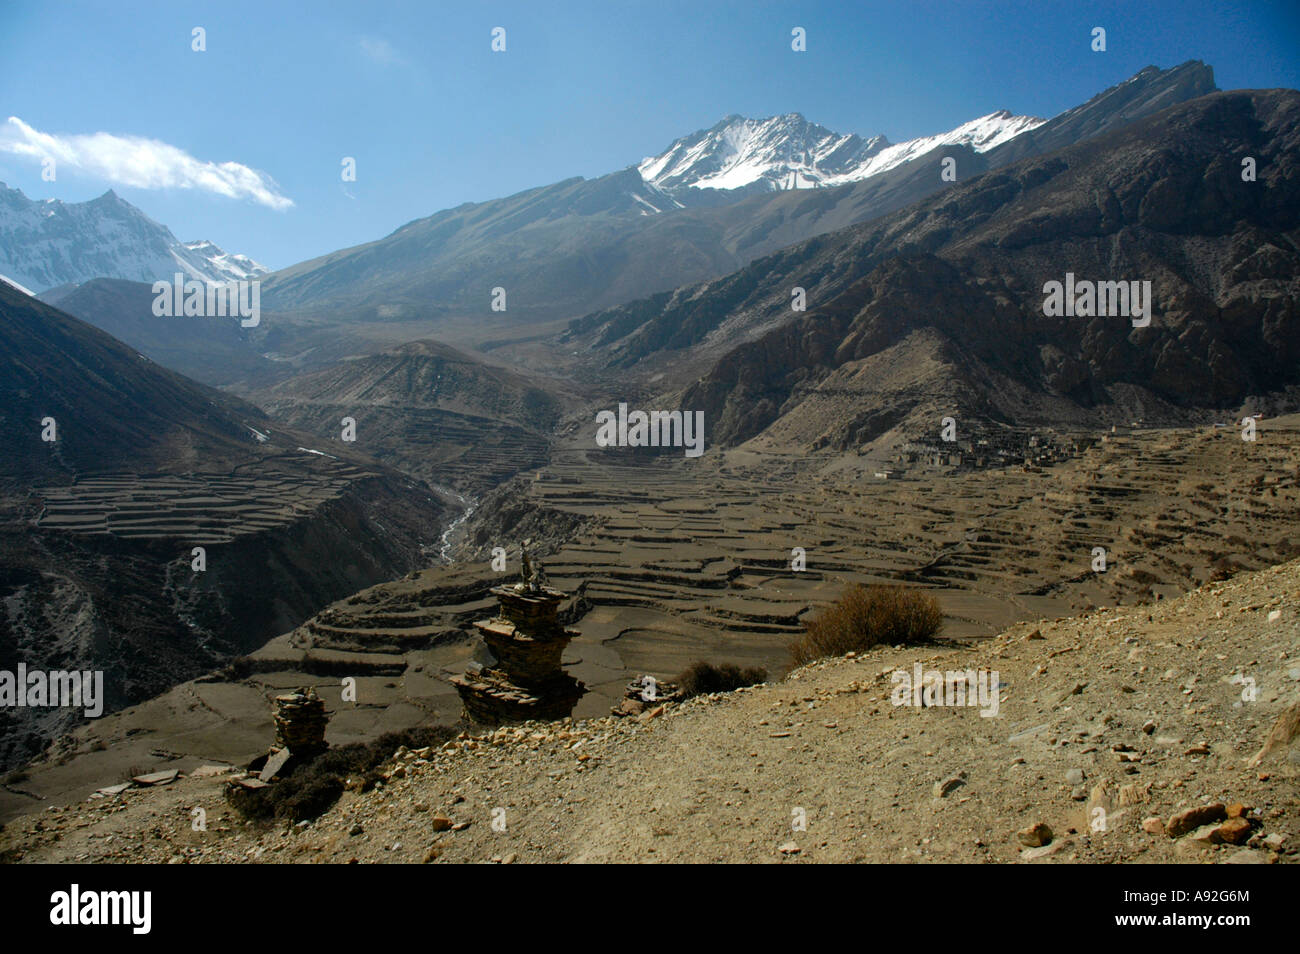 View into the grand valley of the mountain village with its terraces Nar Nar-Phu Annapurna Region Nepal Stock Photo